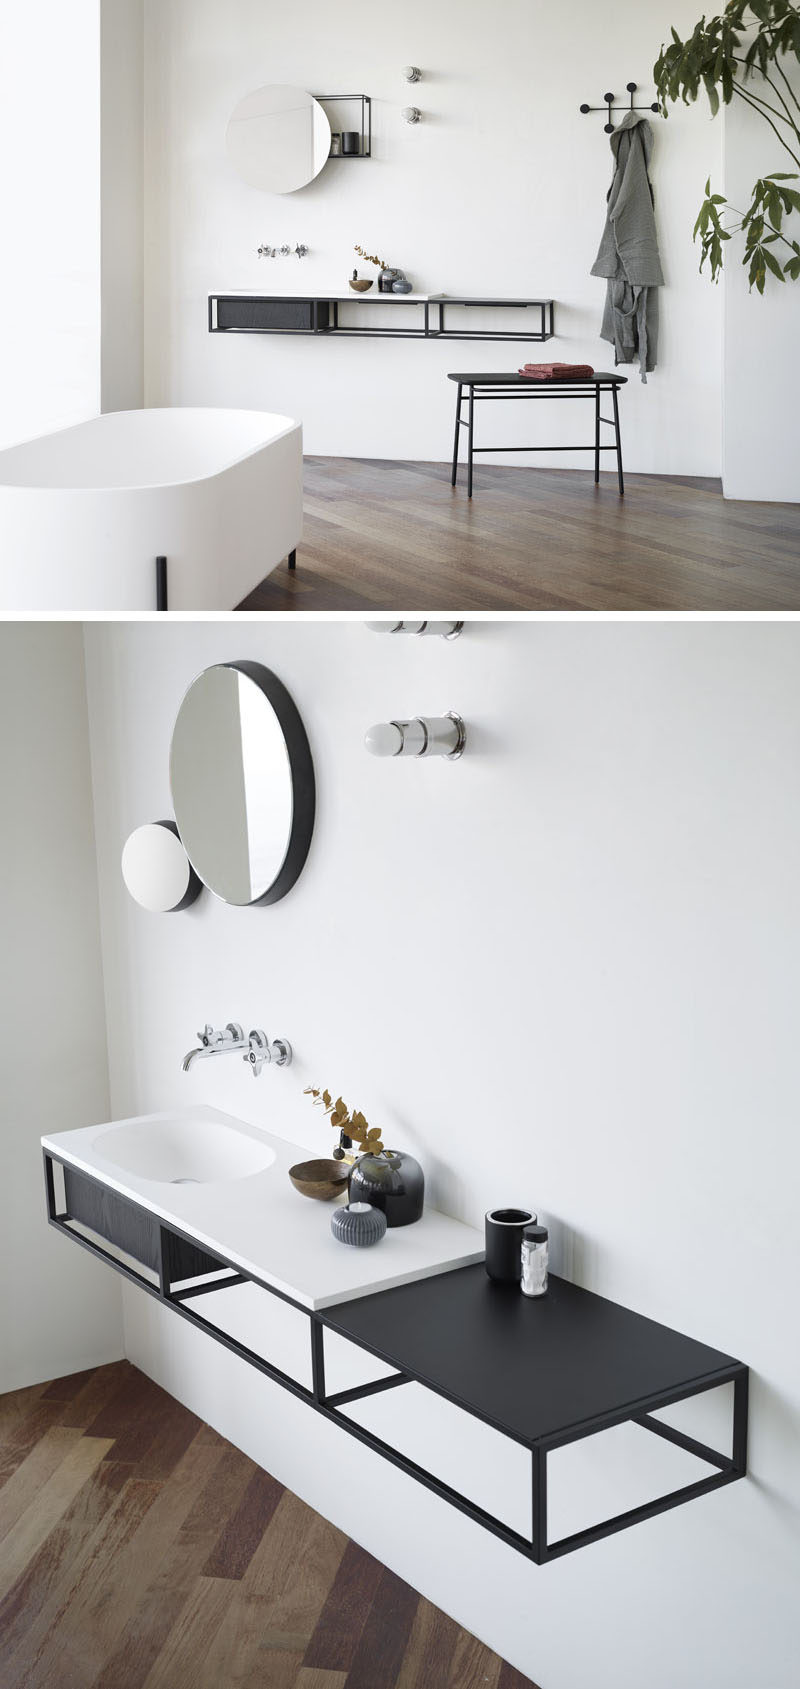 Norm Architects have designed a collection of modular minimalist bathroom consoles that feature black graphic frames, marble and wood.